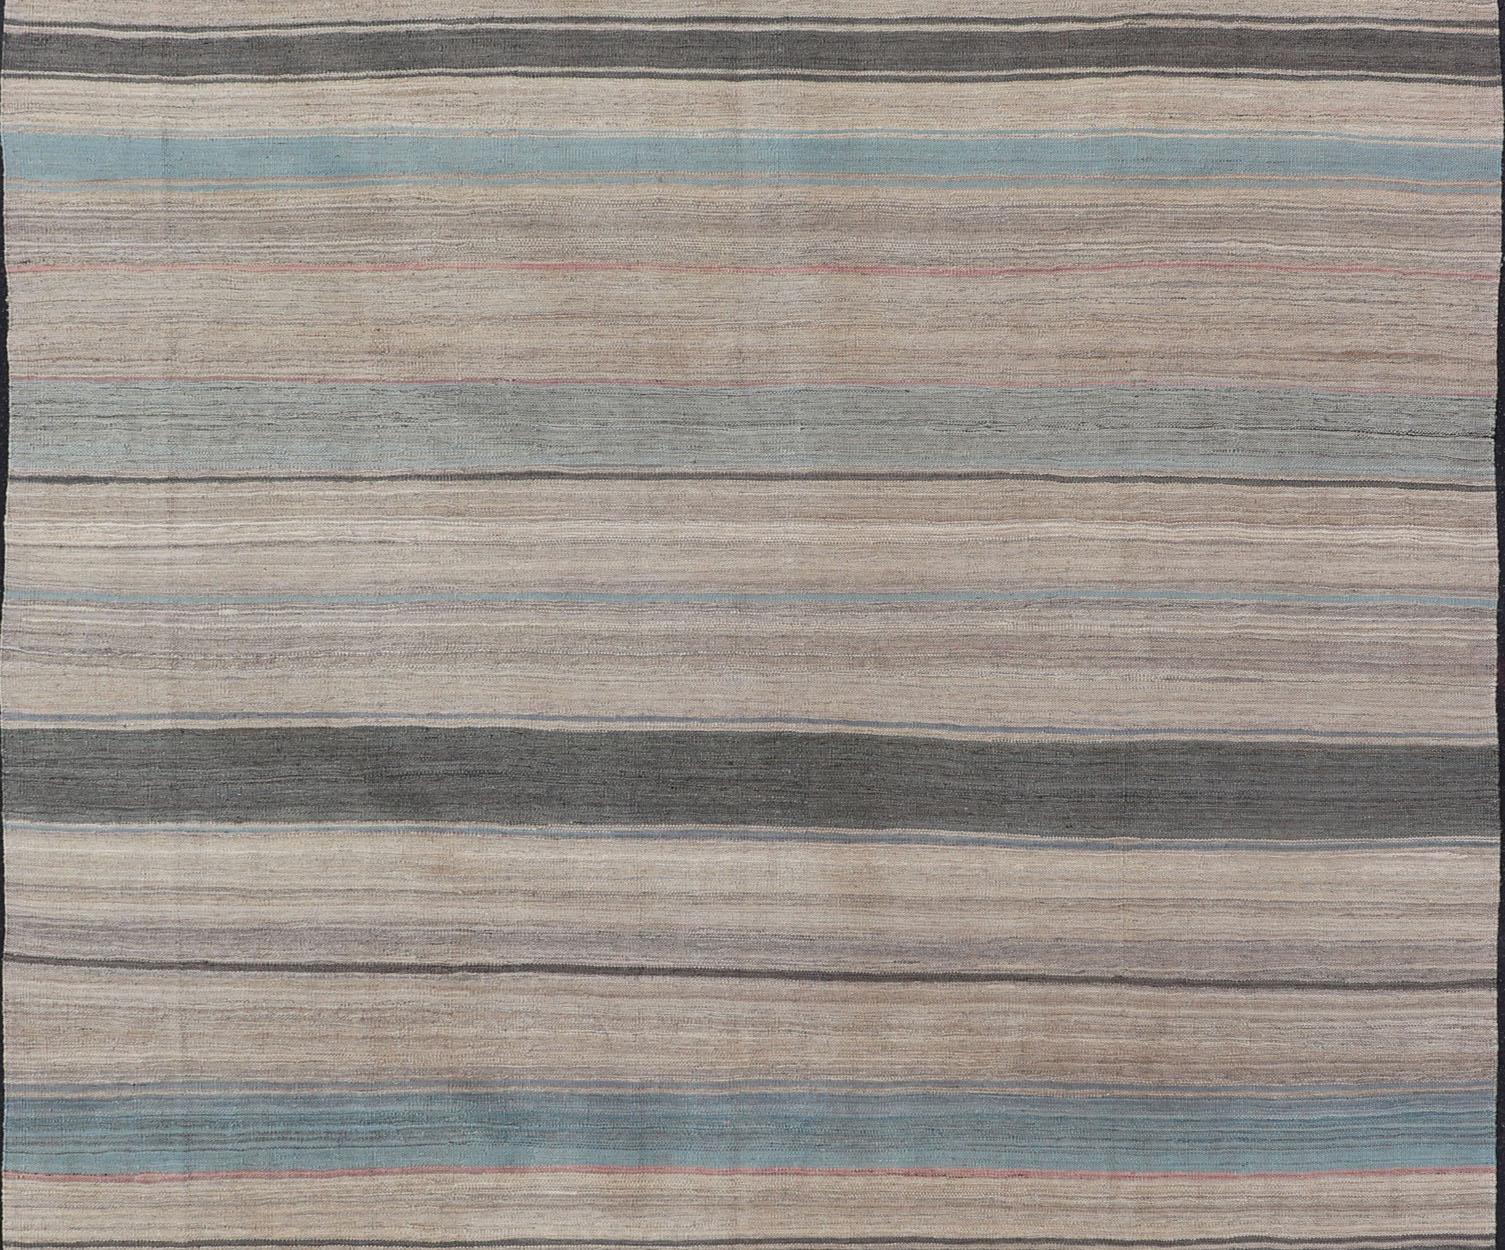 Afghan Modern Kilim Rug with Large Stripes in Shades of Blue, Taupe, Gray For Sale